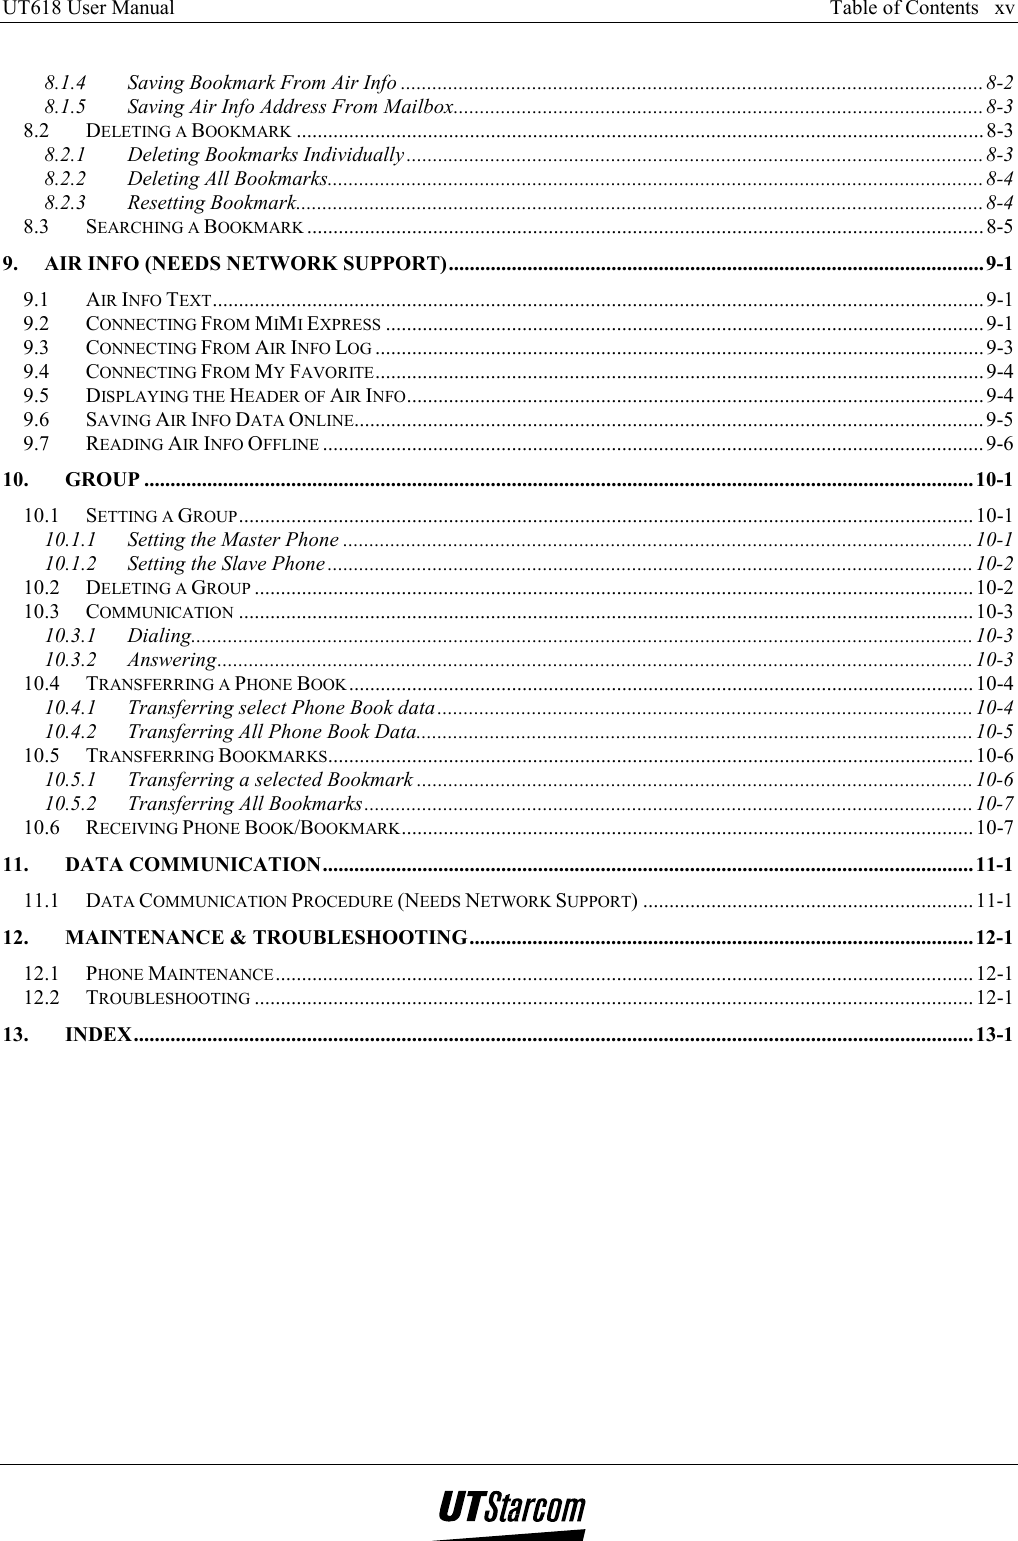 UT618 User Manual      Table of Contents   xv    8.1.4 Saving Bookmark From Air Info ...............................................................................................................8-2 8.1.5 Saving Air Info Address From Mailbox.....................................................................................................8-3 8.2 DELETING A BOOKMARK ................................................................................................................................... 8-3 8.2.1 Deleting Bookmarks Individually ..............................................................................................................8-3 8.2.2 Deleting All Bookmarks.............................................................................................................................8-4 8.2.3 Resetting Bookmark...................................................................................................................................8-4 8.3 SEARCHING A BOOKMARK ................................................................................................................................. 8-5 9. AIR INFO (NEEDS NETWORK SUPPORT)......................................................................................................9-1 9.1 AIR INFO TEXT...................................................................................................................................................9-1 9.2 CONNECTING FROM MIMI EXPRESS ..................................................................................................................9-1 9.3 CONNECTING FROM AIR INFO LOG ....................................................................................................................9-3 9.4 CONNECTING FROM MY FAVORITE....................................................................................................................9-4 9.5 DISPLAYING THE HEADER OF AIR INFO..............................................................................................................9-4 9.6 SAVING AIR INFO DATA ONLINE........................................................................................................................ 9-5 9.7 READING AIR INFO OFFLINE ..............................................................................................................................9-6 10. GROUP ..............................................................................................................................................................10-1 10.1 SETTING A GROUP............................................................................................................................................ 10-1 10.1.1 Setting the Master Phone ........................................................................................................................10-1 10.1.2 Setting the Slave Phone...........................................................................................................................10-2 10.2 DELETING A GROUP .........................................................................................................................................10-2 10.3 COMMUNICATION ............................................................................................................................................ 10-3 10.3.1 Dialing.....................................................................................................................................................10-3 10.3.2 Answering................................................................................................................................................10-3 10.4 TRANSFERRING A PHONE BOOK ....................................................................................................................... 10-4 10.4.1 Transferring select Phone Book data......................................................................................................10-4 10.4.2 Transferring All Phone Book Data..........................................................................................................10-5 10.5 TRANSFERRING BOOKMARKS...........................................................................................................................10-6 10.5.1 Transferring a selected Bookmark ..........................................................................................................10-6 10.5.2 Transferring All Bookmarks....................................................................................................................10-7 10.6 RECEIVING PHONE BOOK/BOOKMARK.............................................................................................................10-7 11. DATA COMMUNICATION............................................................................................................................11-1 11.1 DATA COMMUNICATION PROCEDURE (NEEDS NETWORK SUPPORT) ............................................................... 11-1 12. MAINTENANCE &amp; TROUBLESHOOTING................................................................................................12-1 12.1 PHONE MAINTENANCE..................................................................................................................................... 12-1 12.2 TROUBLESHOOTING ......................................................................................................................................... 12-1 13. INDEX................................................................................................................................................................13-1   